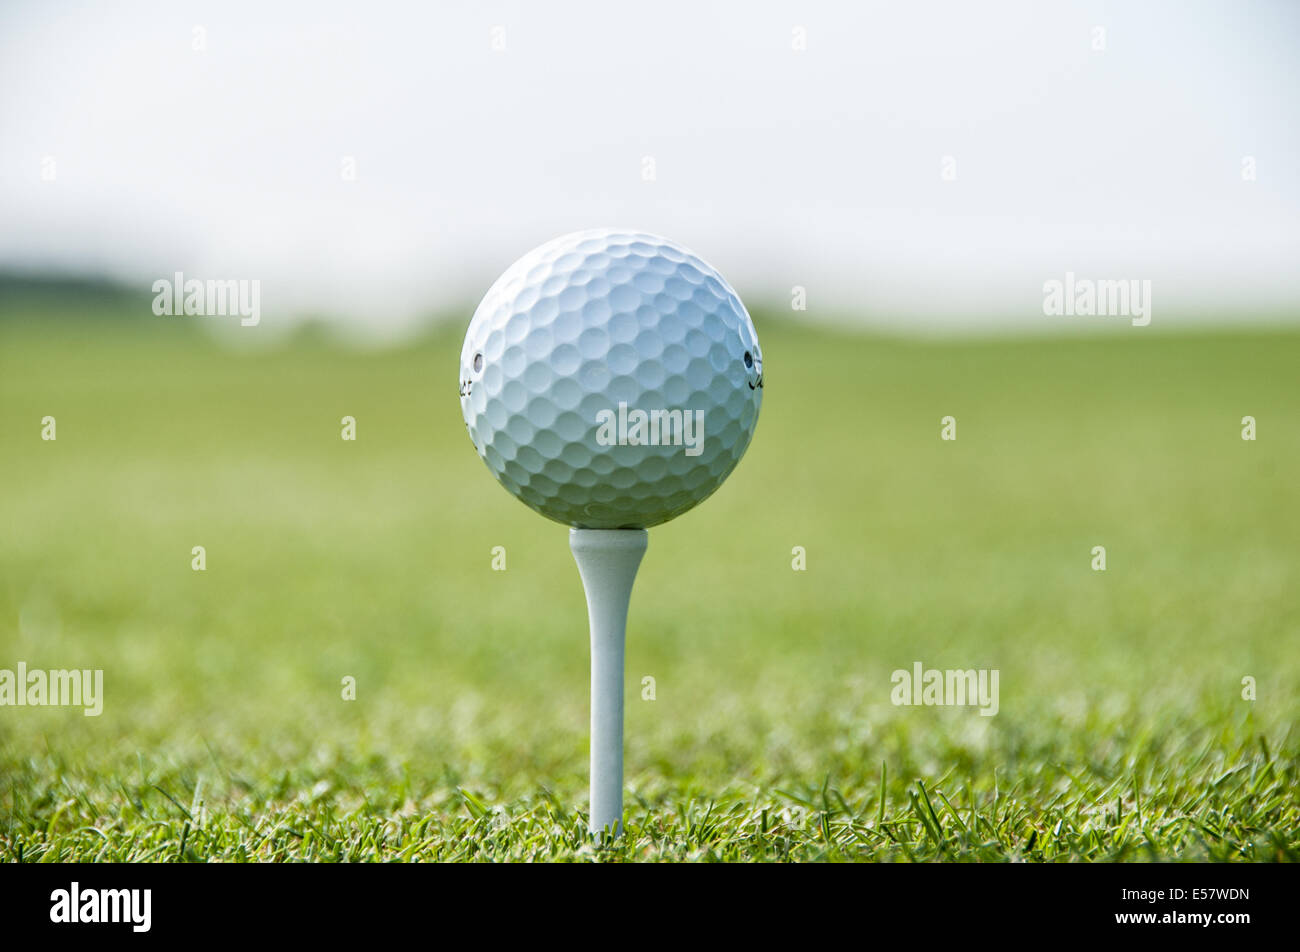 Close up of a golf ball teed up ready to hit down the fairway Stock Photo